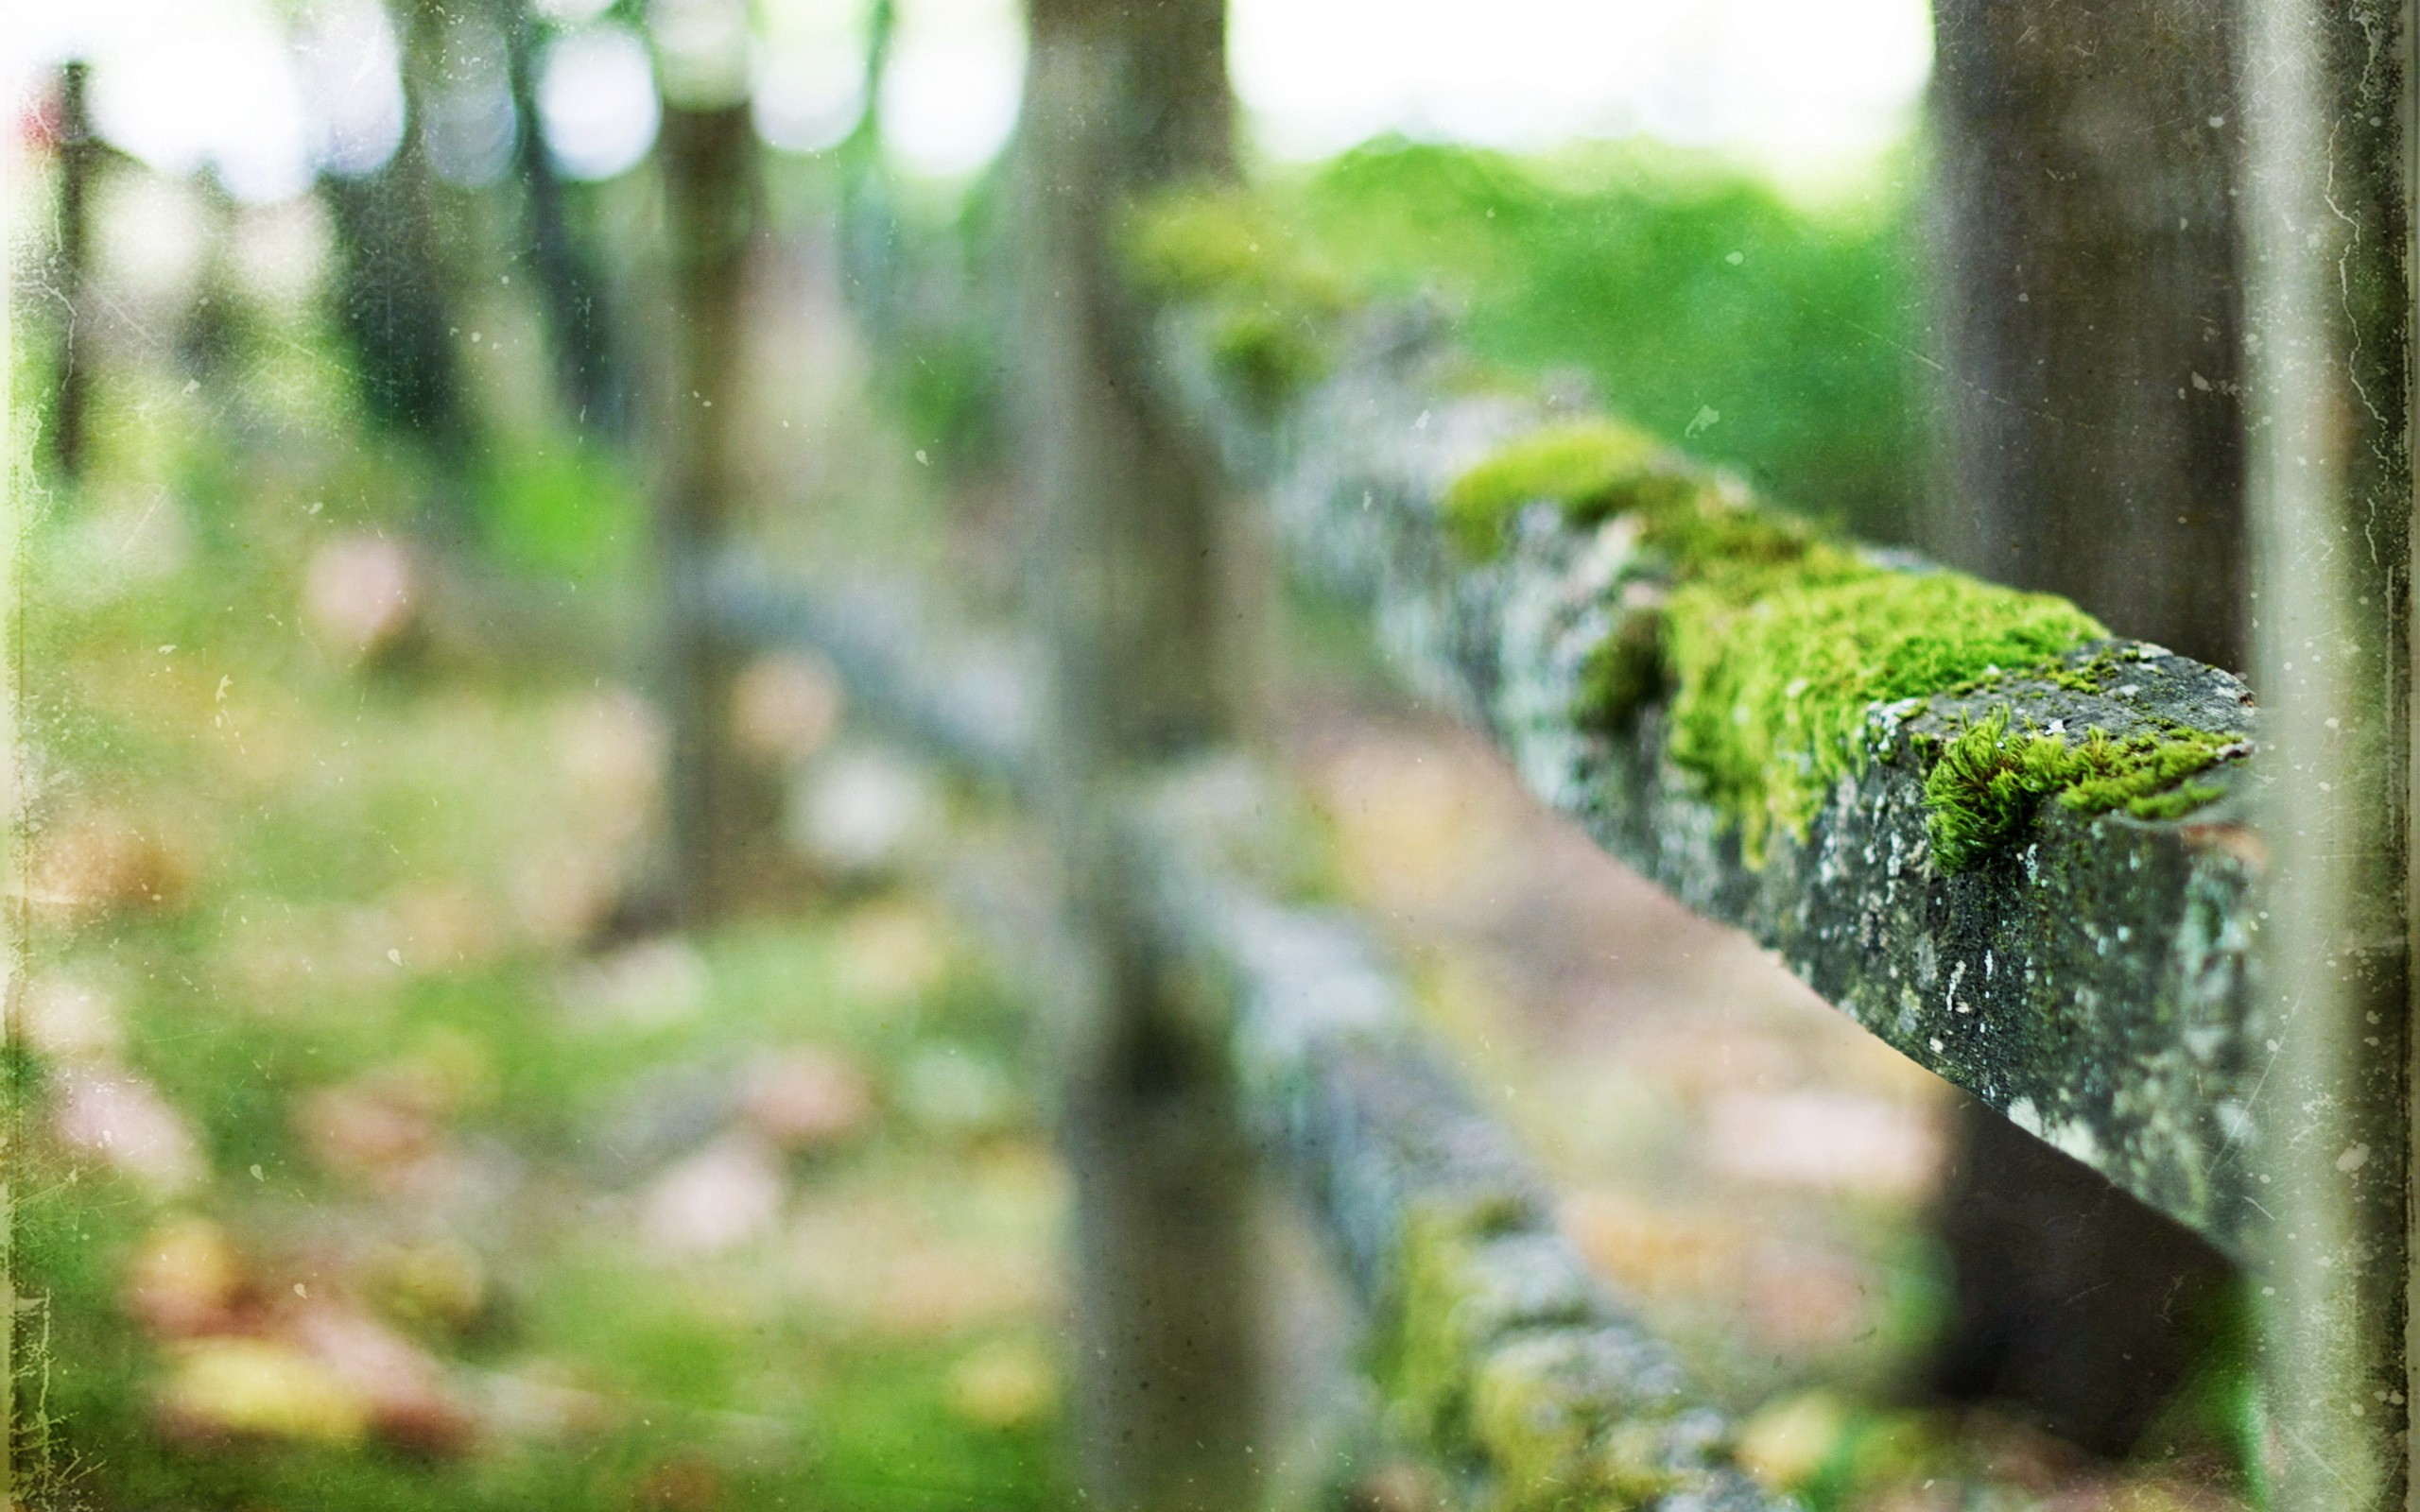 General 2560x1600 fence moss plants outdoors